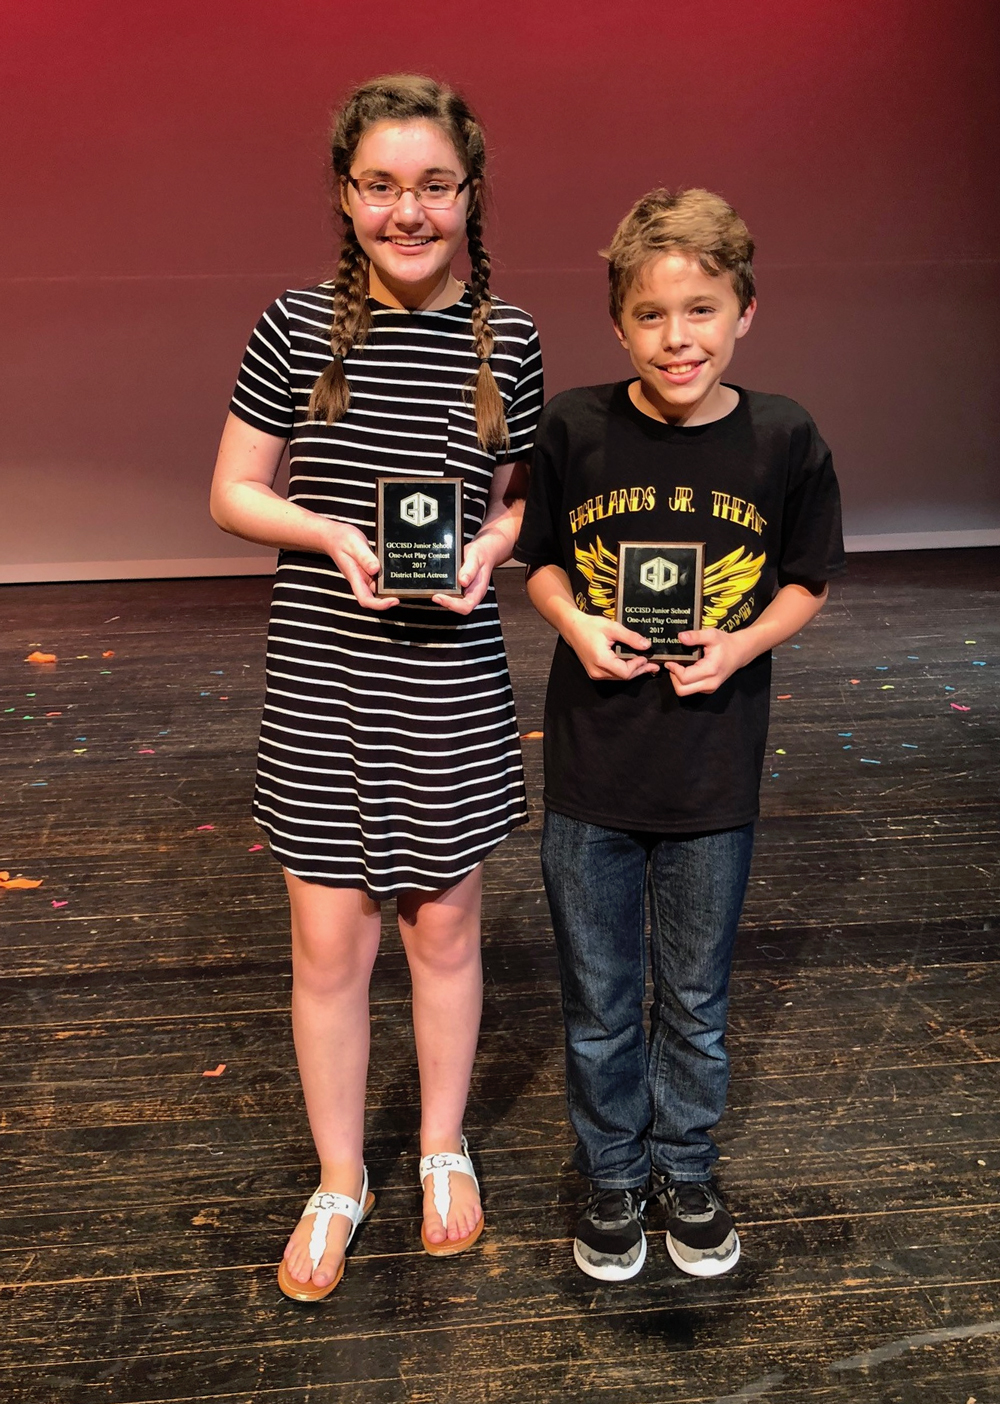  Madeleine Broussard (left) from Gentry Junior School was selected as District Best Actress, and Cash Hill from Highlands Junior School was selected as District Best Actor at the recent District Junior School One-Act Play Festival.
